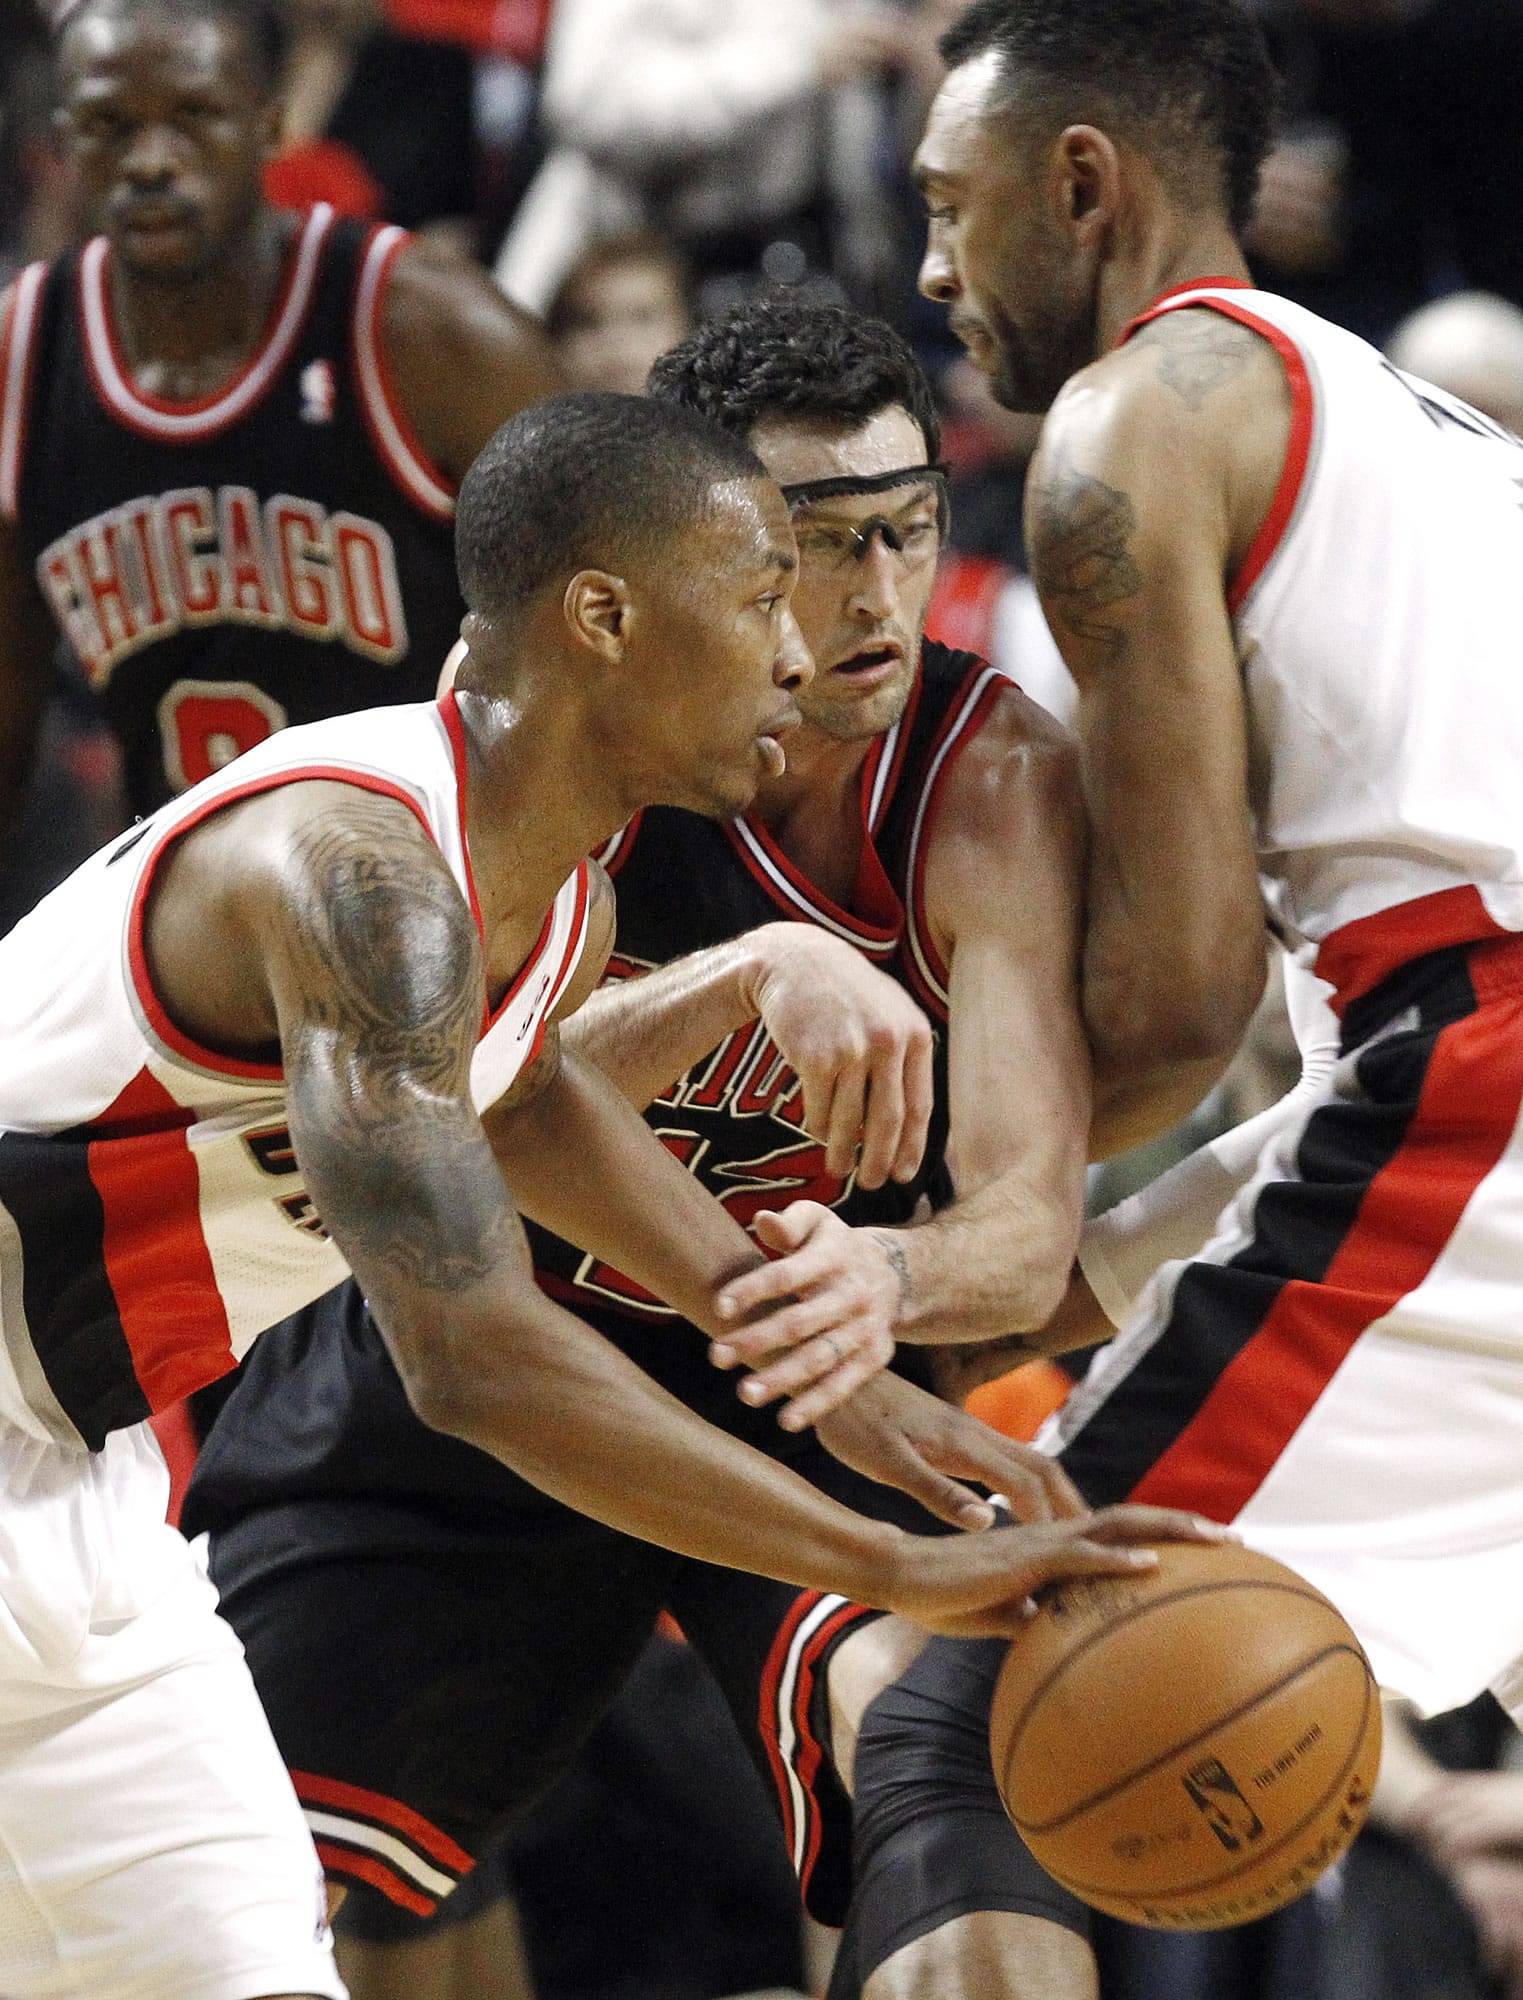 Portland Trail Blazers guard Damian Lillard, left, drives on Chicago Bulls guard Kirk Hinrich, middle, as he is screened out by Trail Blazers forward Jared Jeffries during the first quarter Sunday.